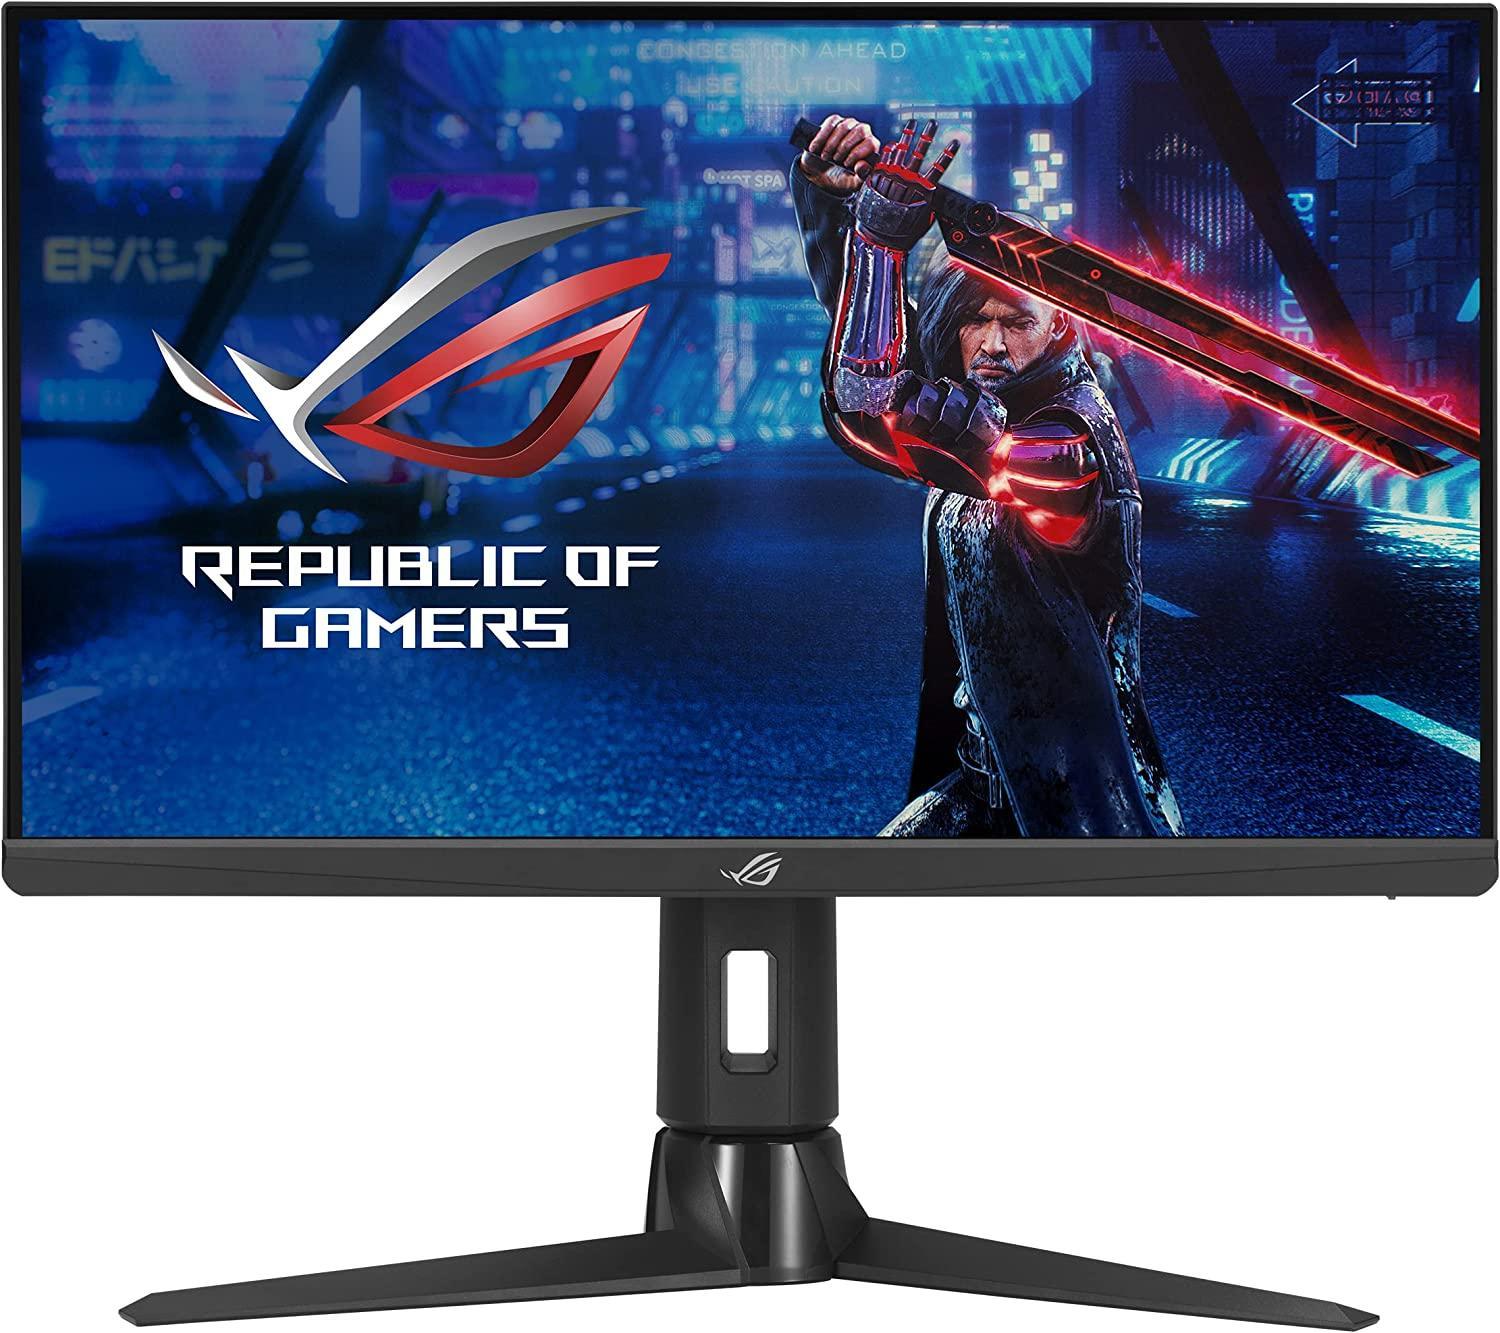 ASUS ROG Strix 24.5” 1080P HDR Gaming-Monitor (XG259CM) - Full HD, Fast IPS, 240Hz, 1ms, Extreme Low Motion Blur Sync, G-Sync compatible-KVM-support, Tripod socket for Webcam, USB Type-C, DisplayPort